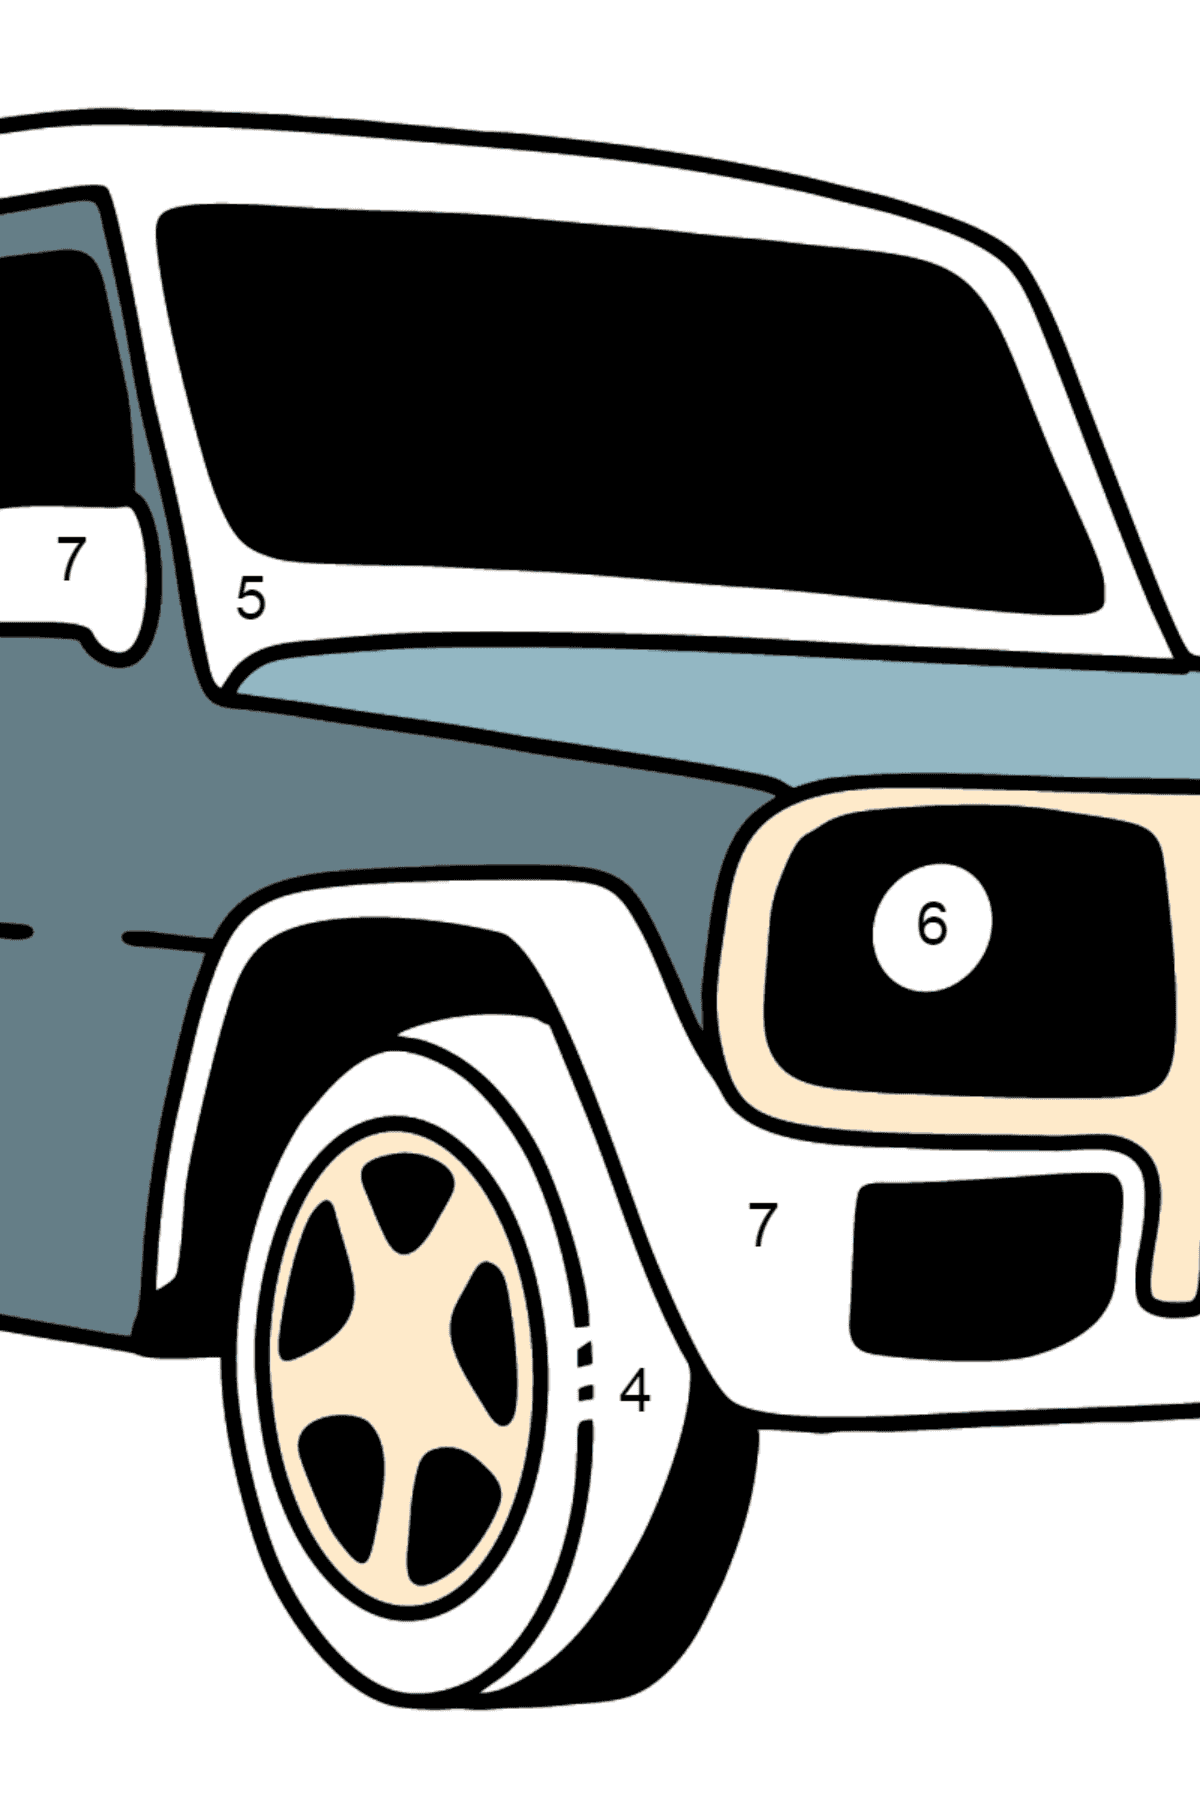 Mercedes-Benz G-Class SUV coloring page - Coloring by Numbers for Kids